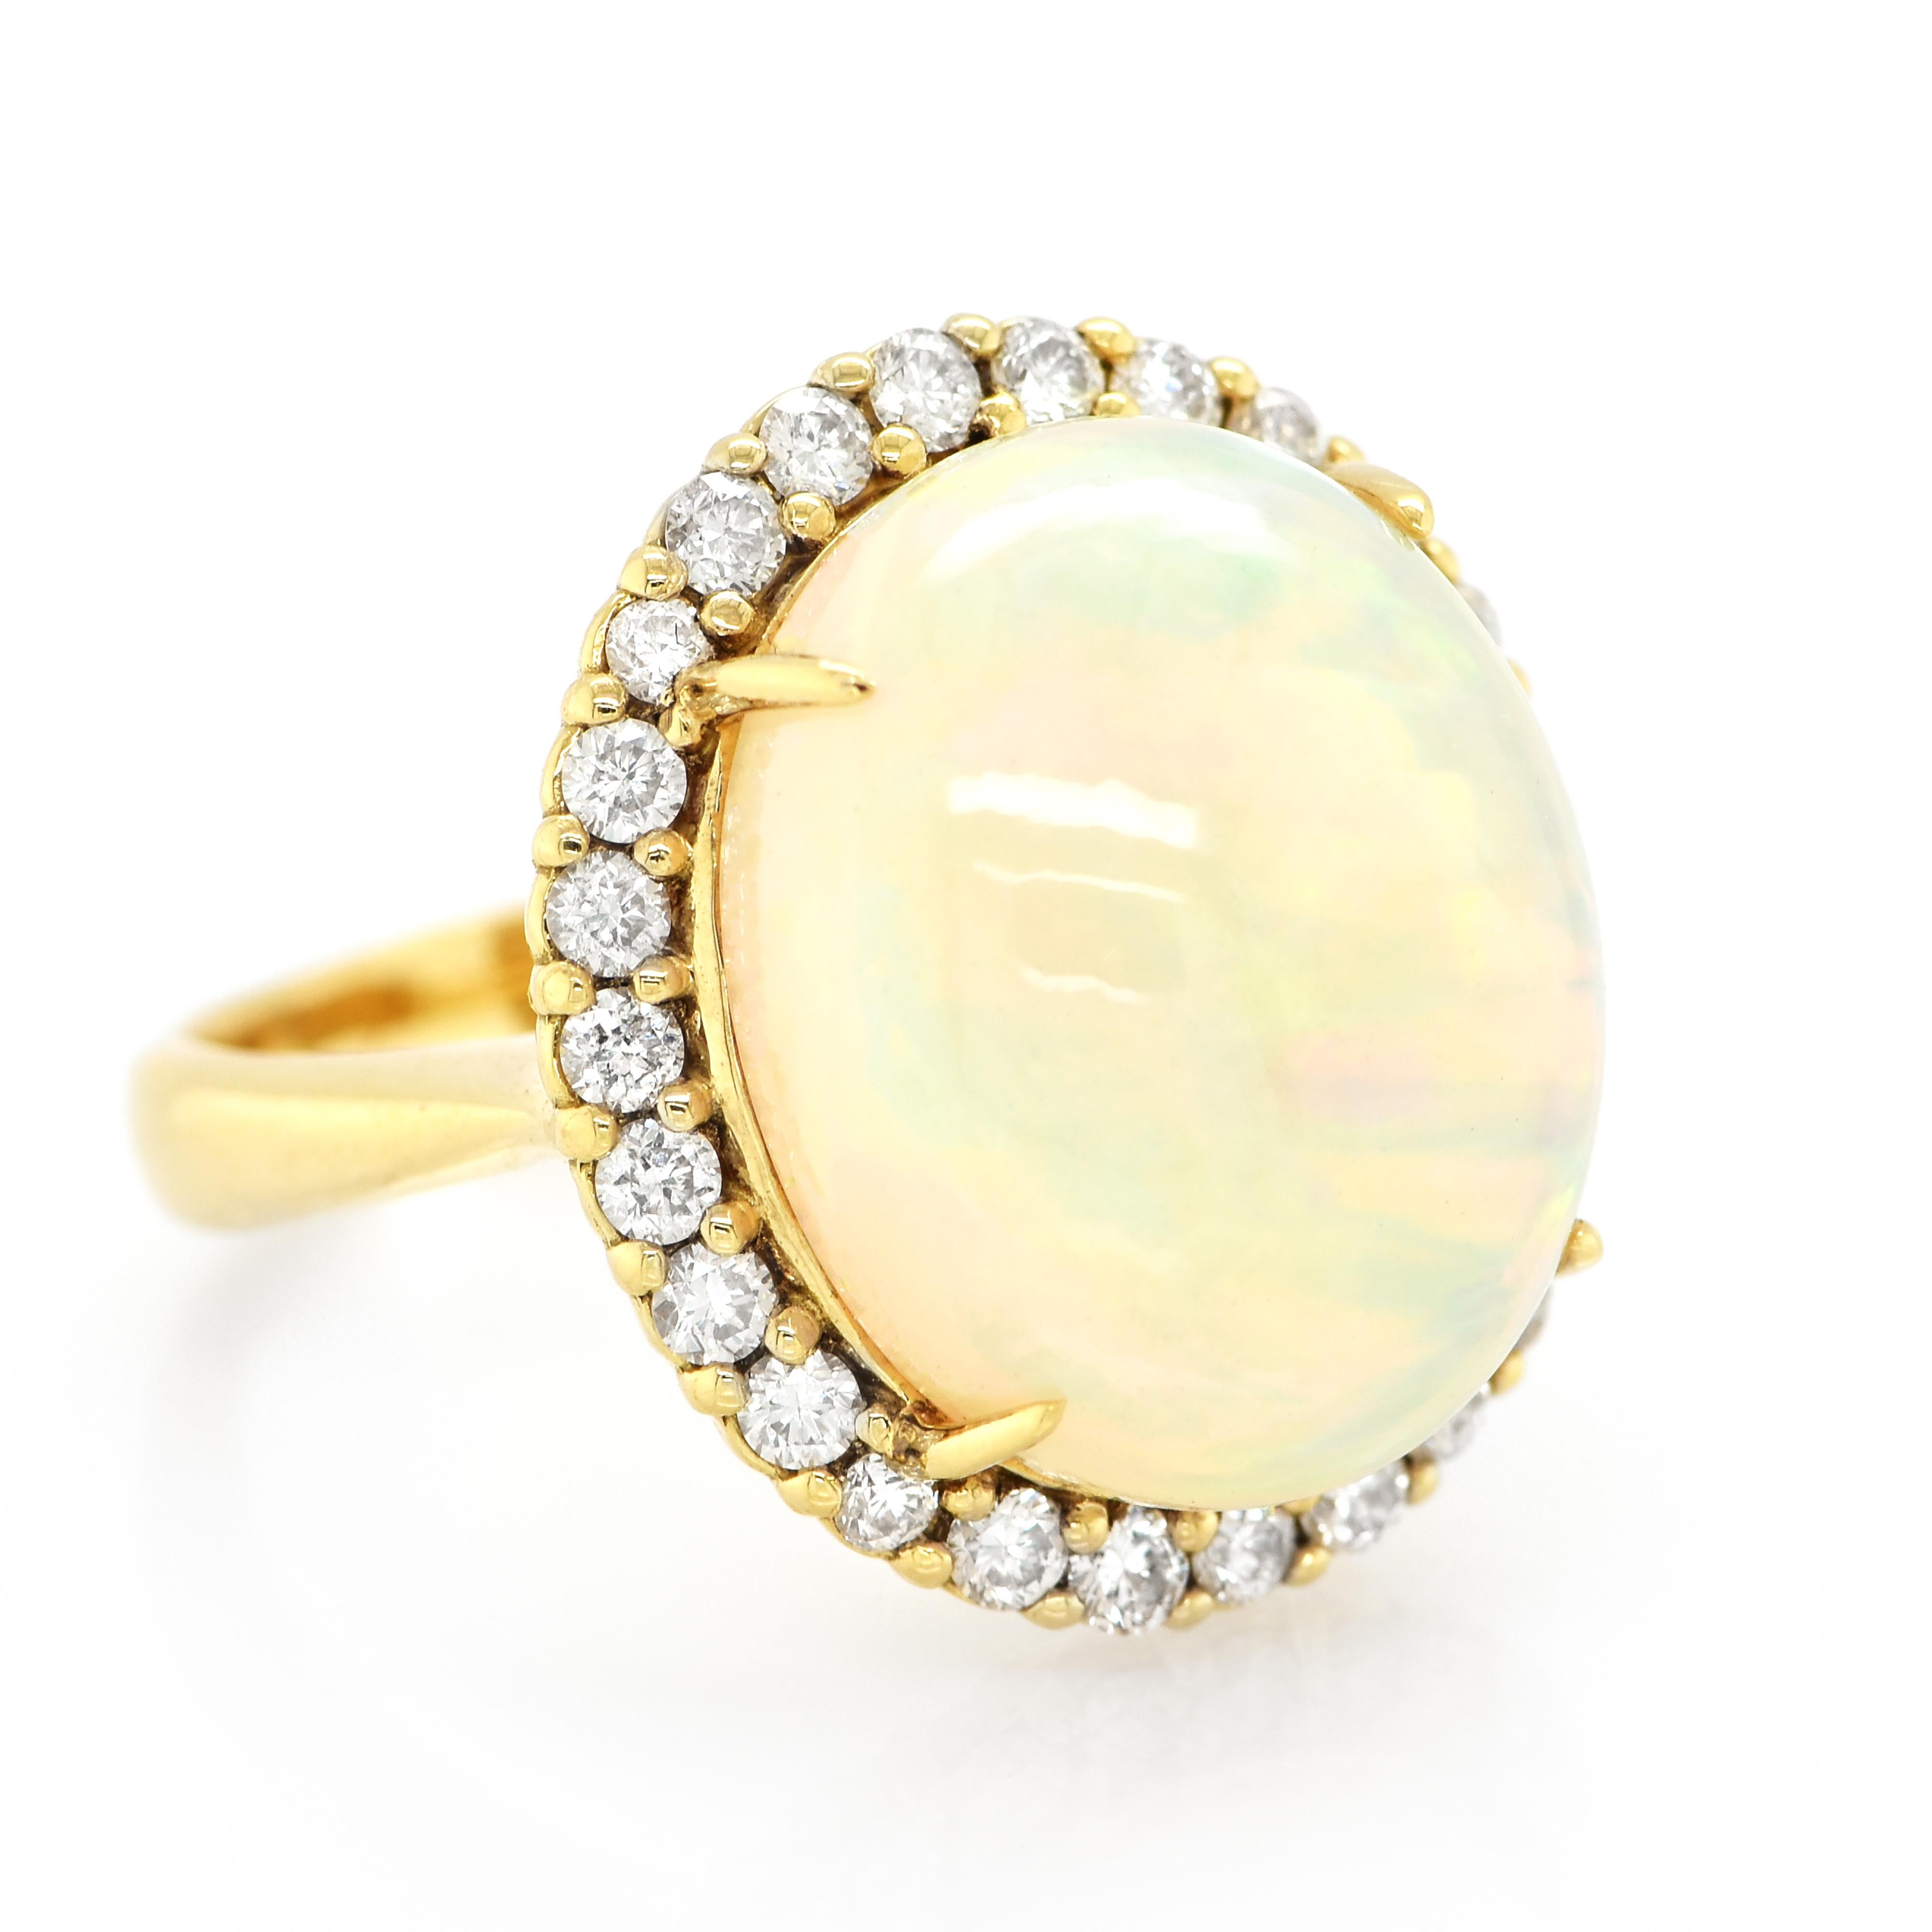 Cabochon 9.68 Carat Natural White, Ethiopian Opal and Diamond Ring Set in 18K Gold